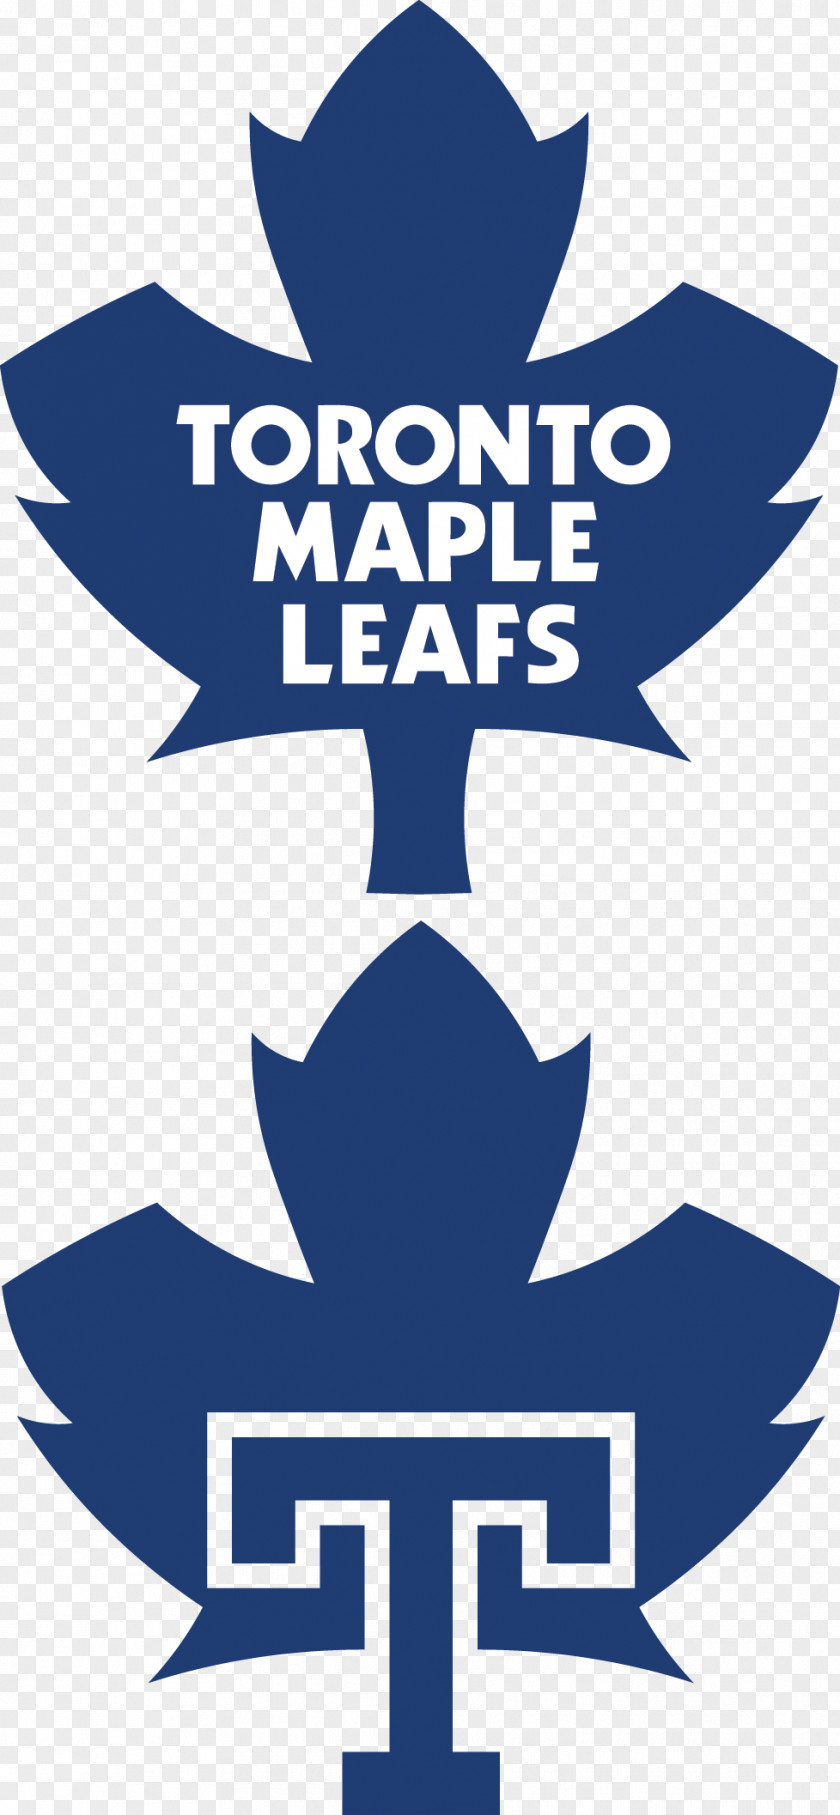 Red Maple Leaf Logo Toronto Leafs National Hockey League Scotiabank Arena St. John's Marlies PNG